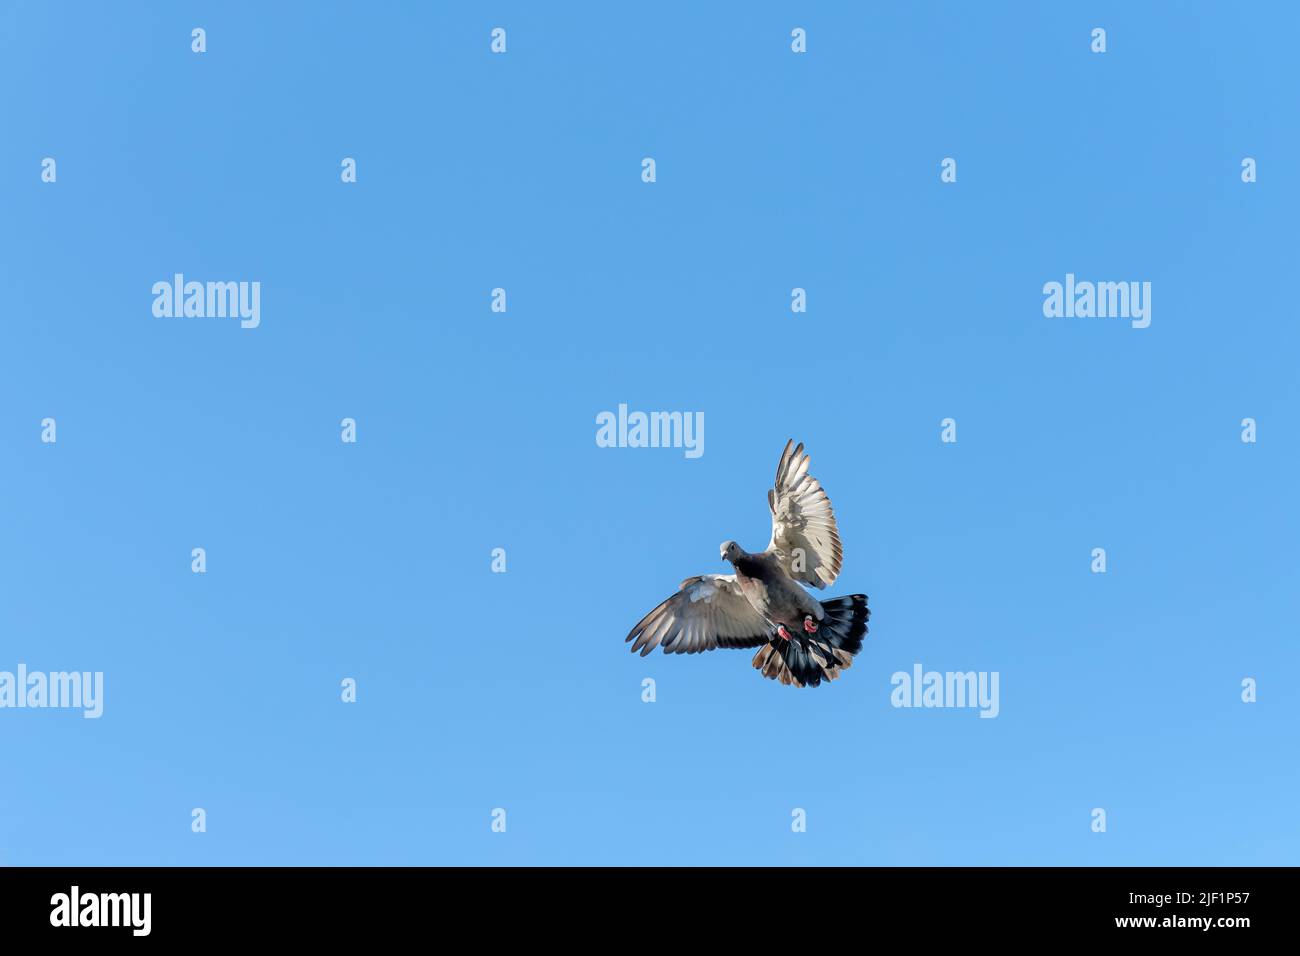 Beautiful flying carrier pigeon with a blue sky as background Stock Photo